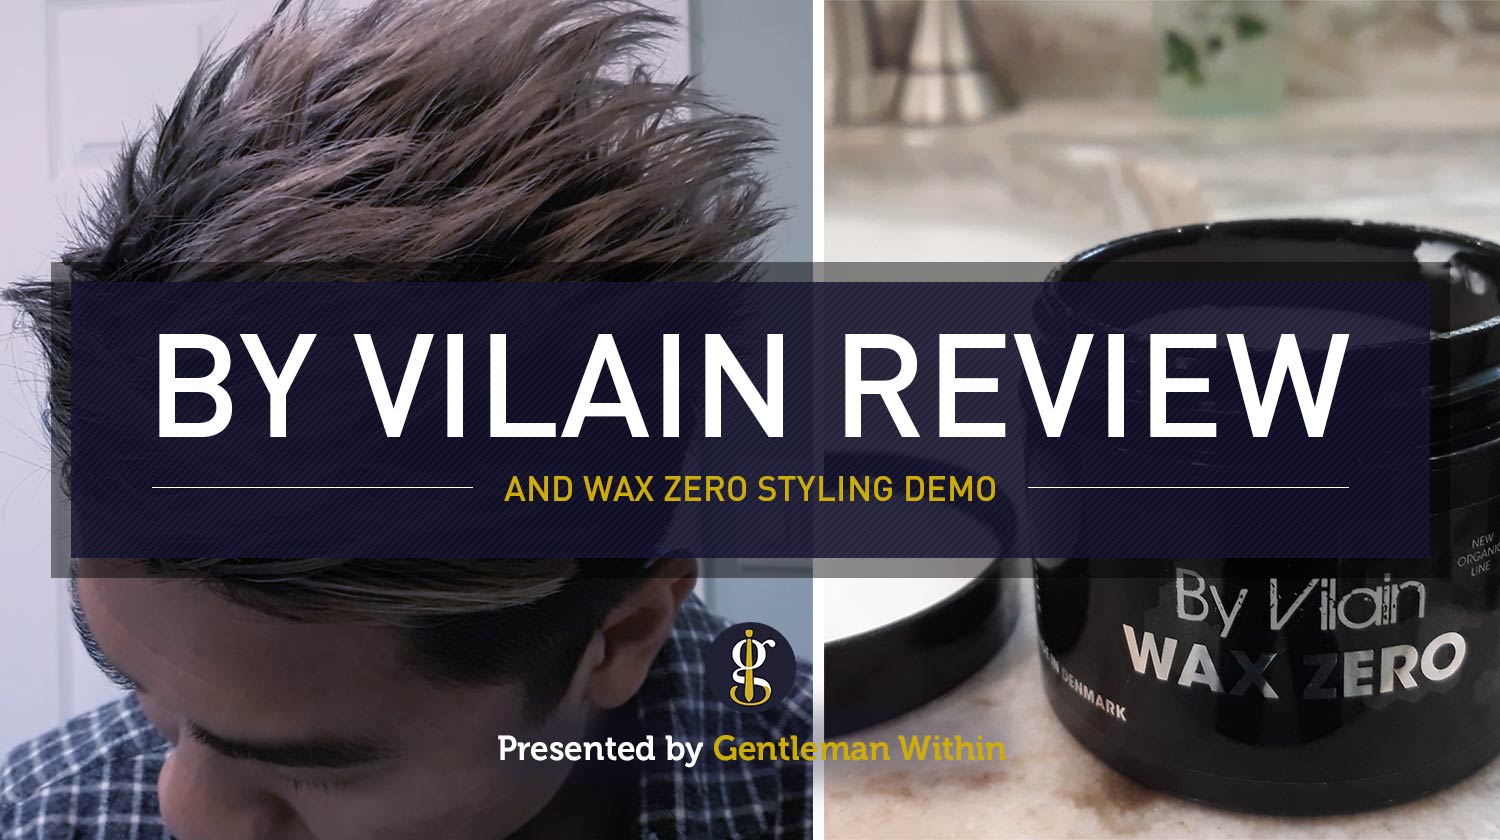 By Vilain (Honest) Review: A Wax Zero (Organic) Styling Demo